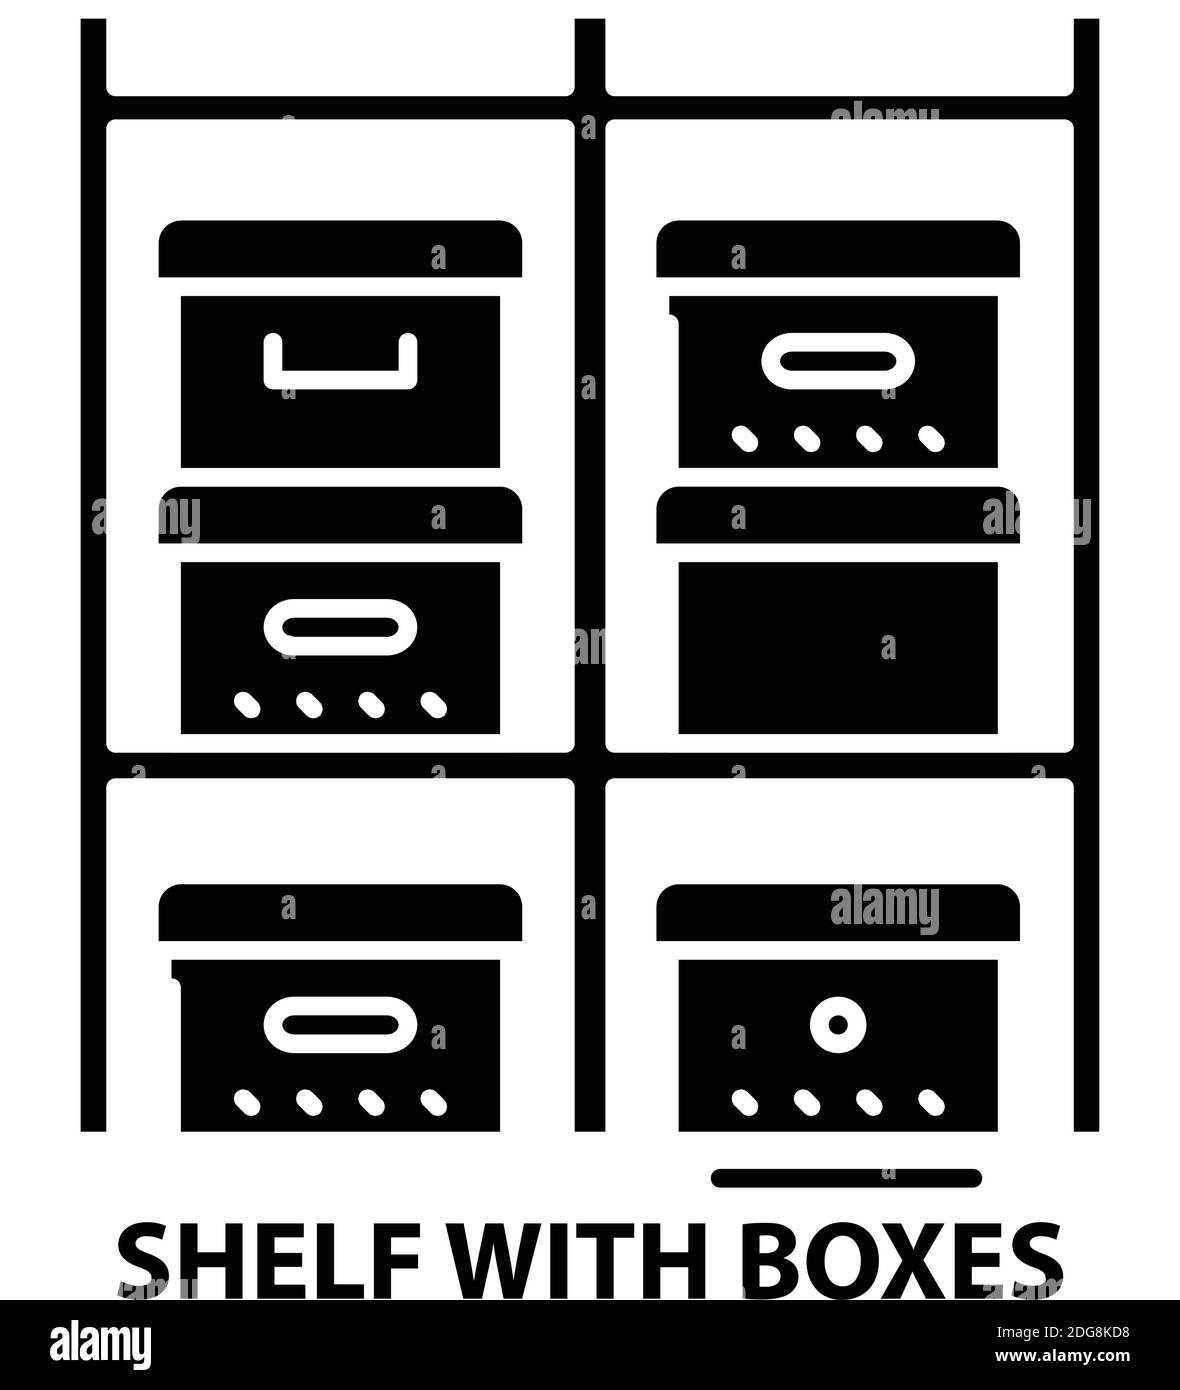 shelf with boxes icon, black vector sign with editable strokes, concept illustration Stock Vector